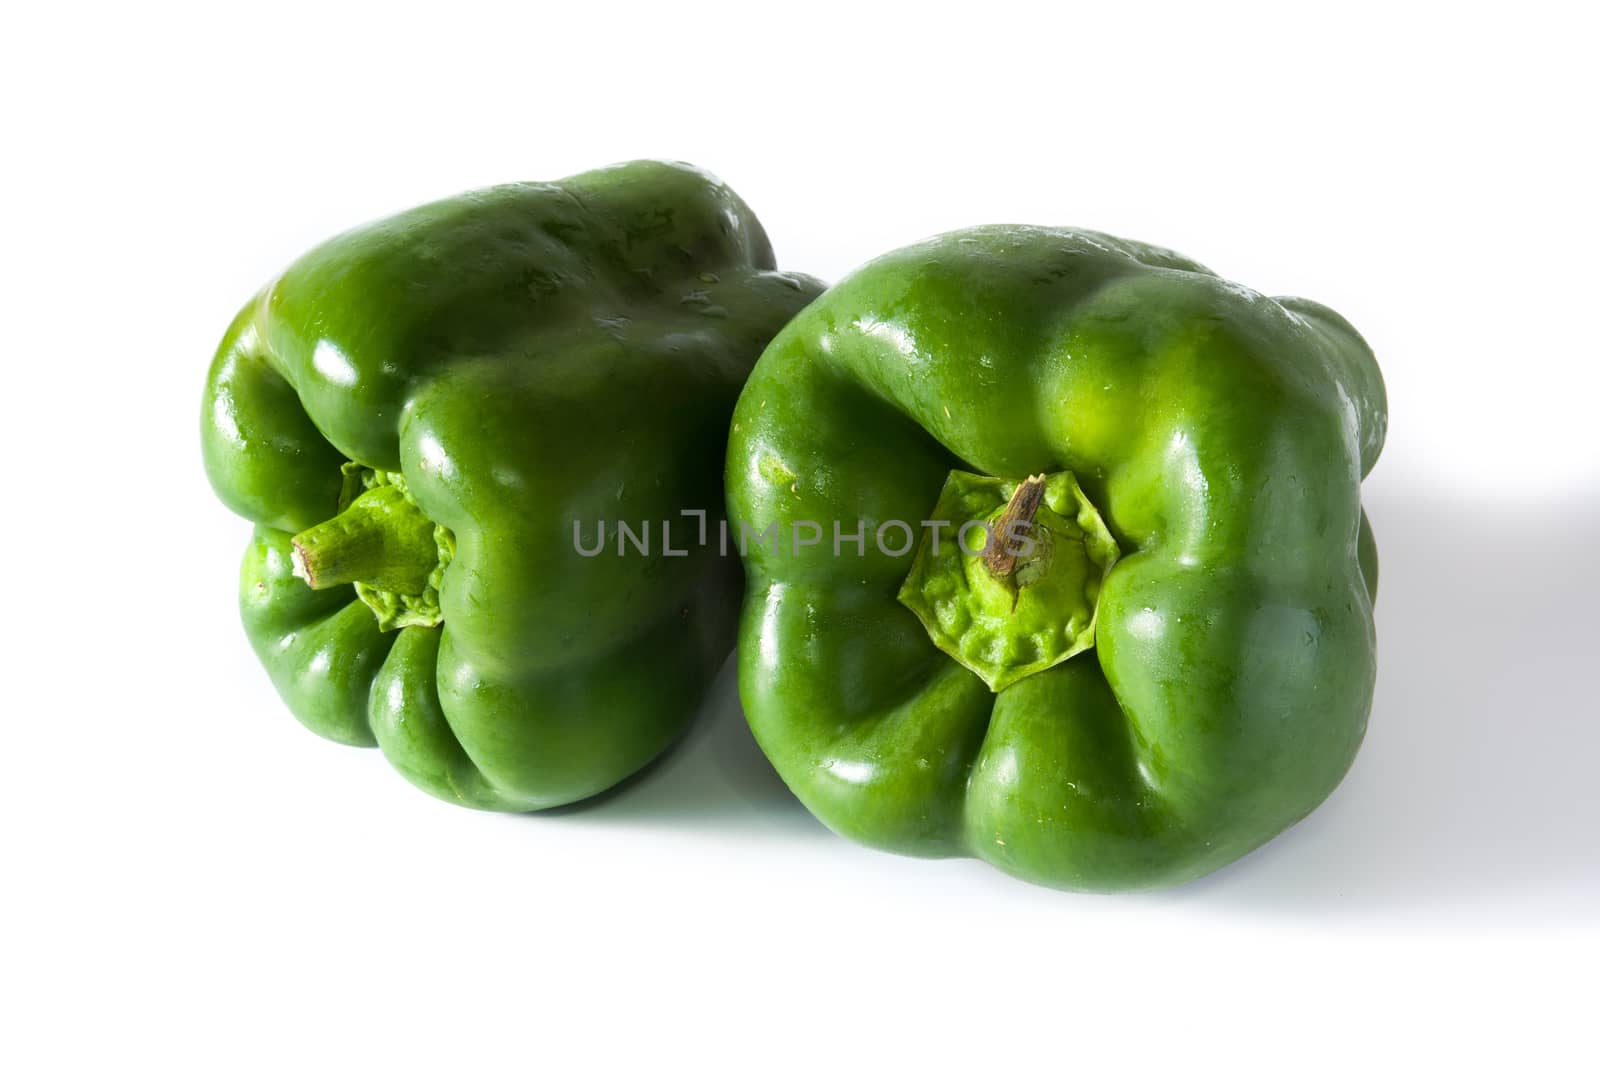 Fresh green peppers by chandlervid85